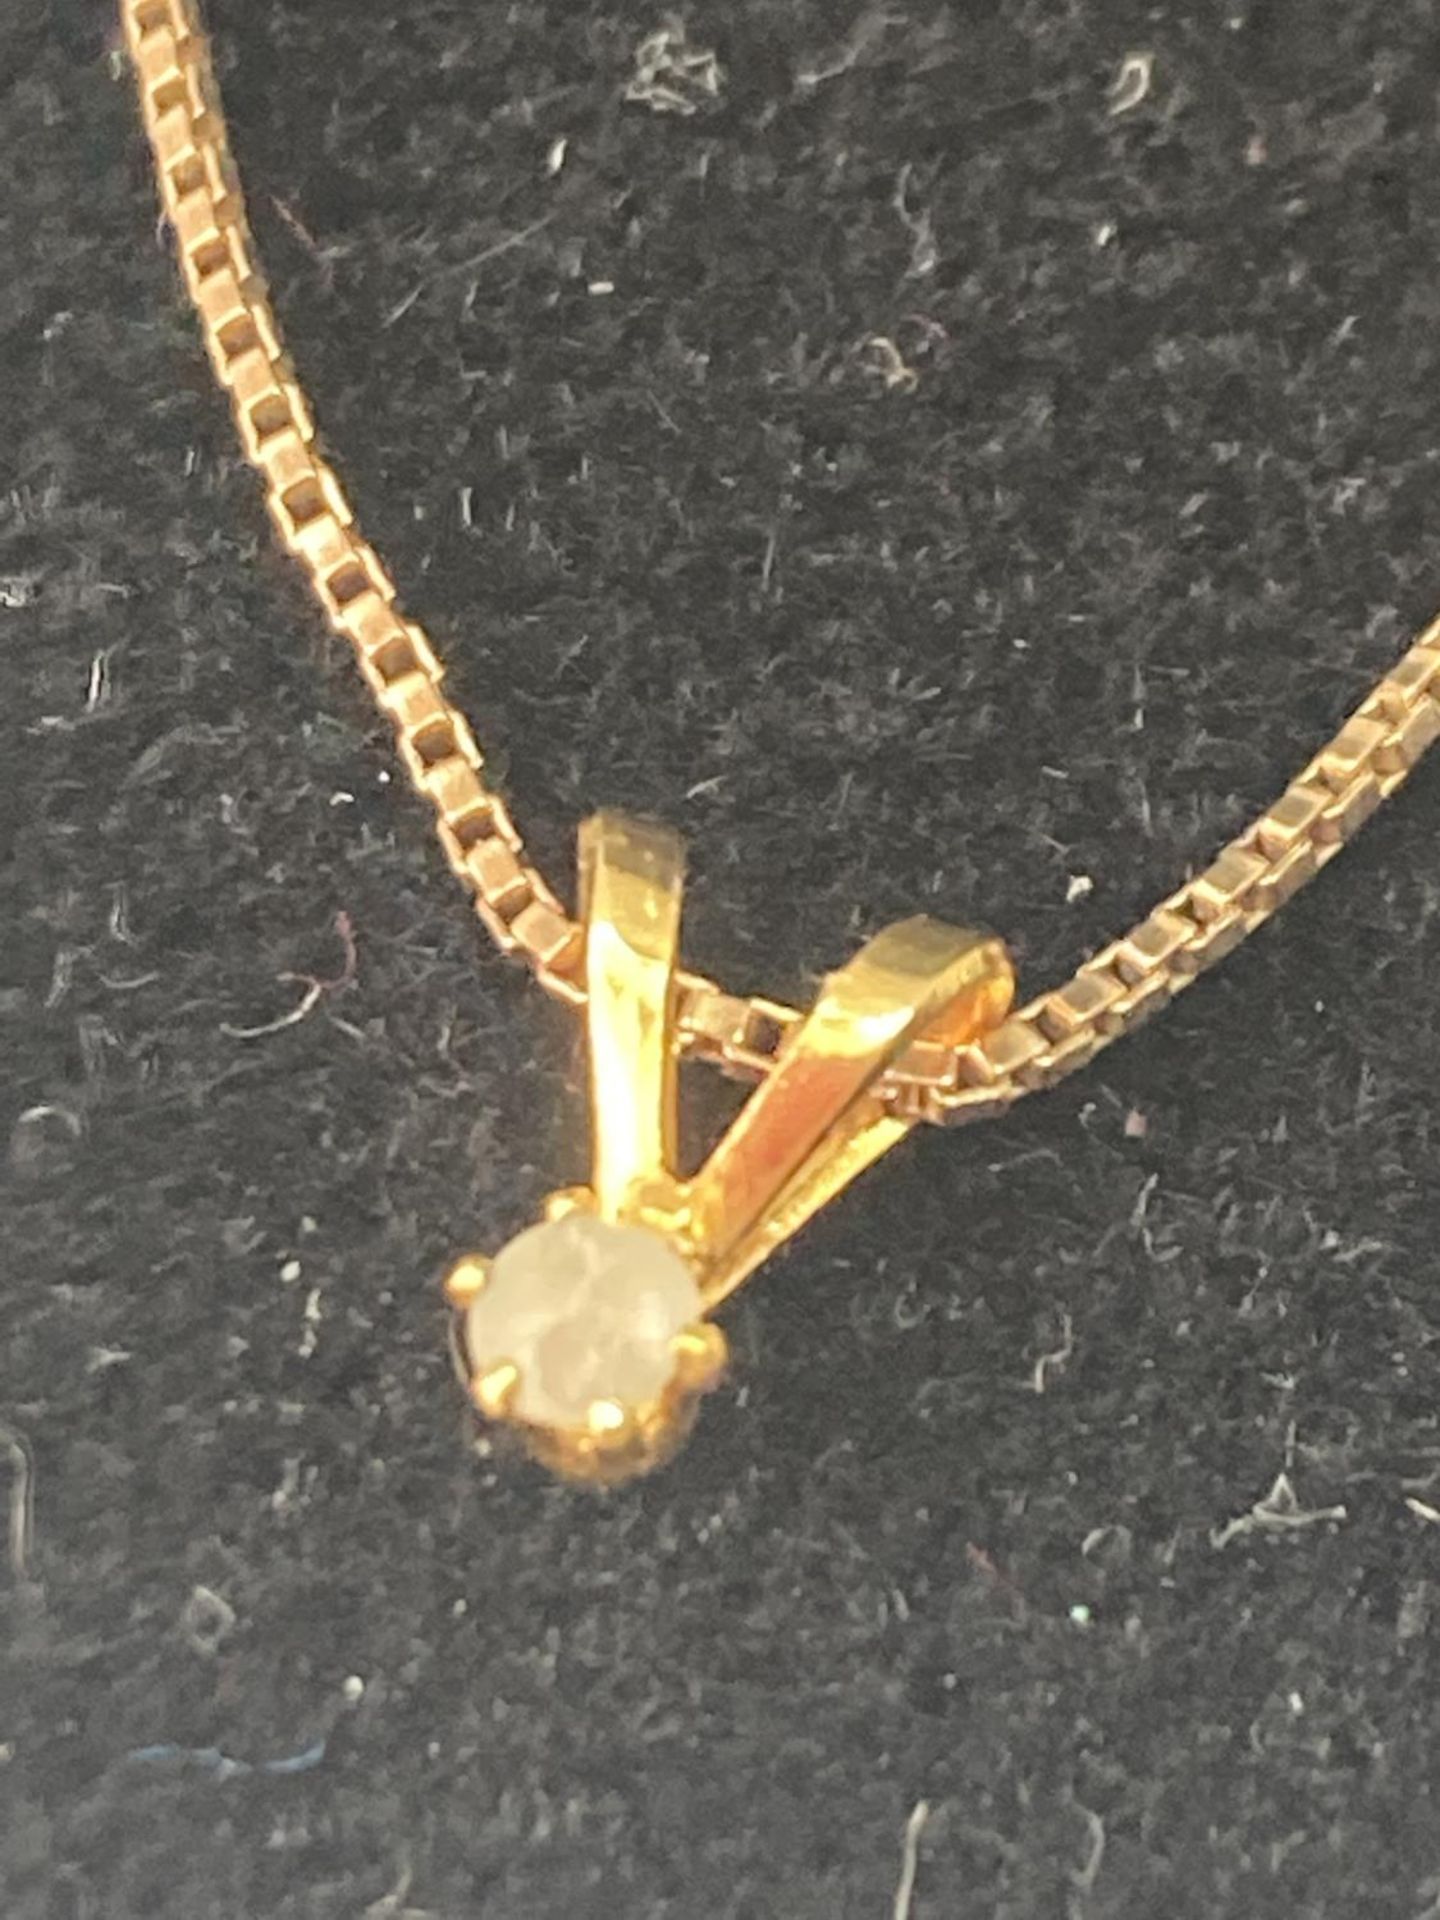 A 9 CARAT GOLD NECKLACE WITH A 9 CARAT GOLD AND DIAMOND PENDANT IN A PRESENTATION BOX - Image 4 of 10